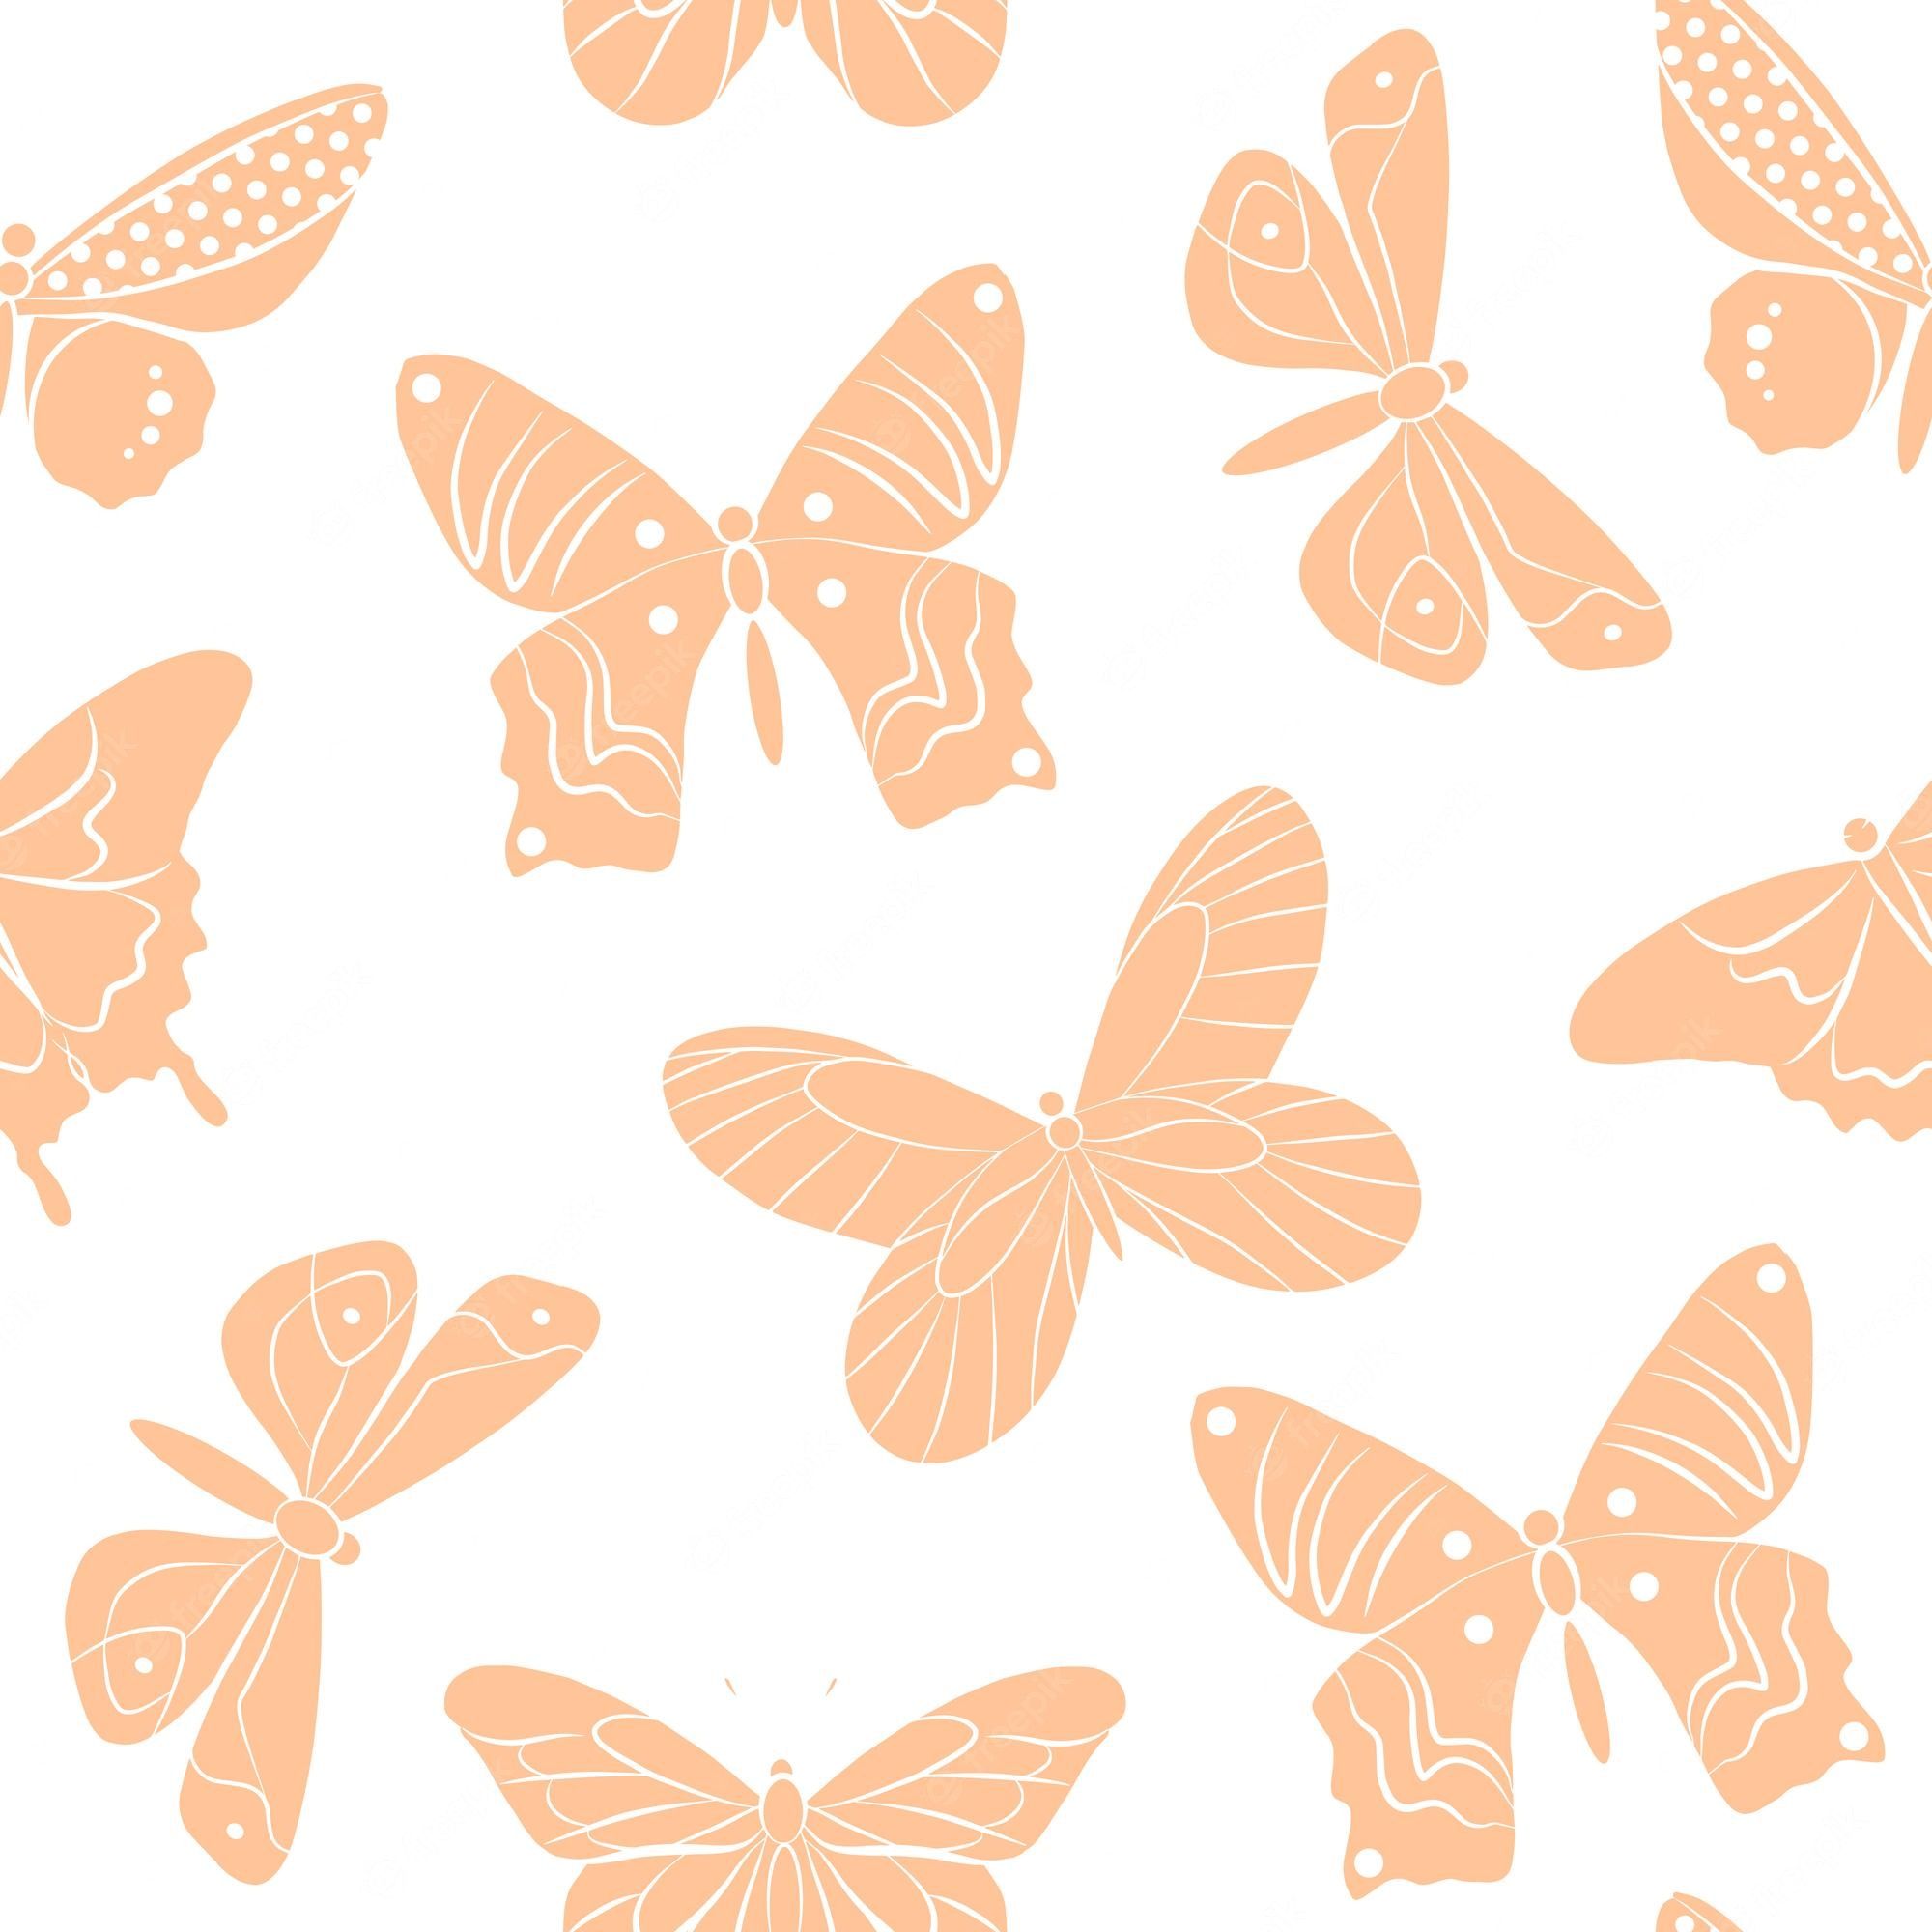 Butterflies are seen in this image - Pastel orange